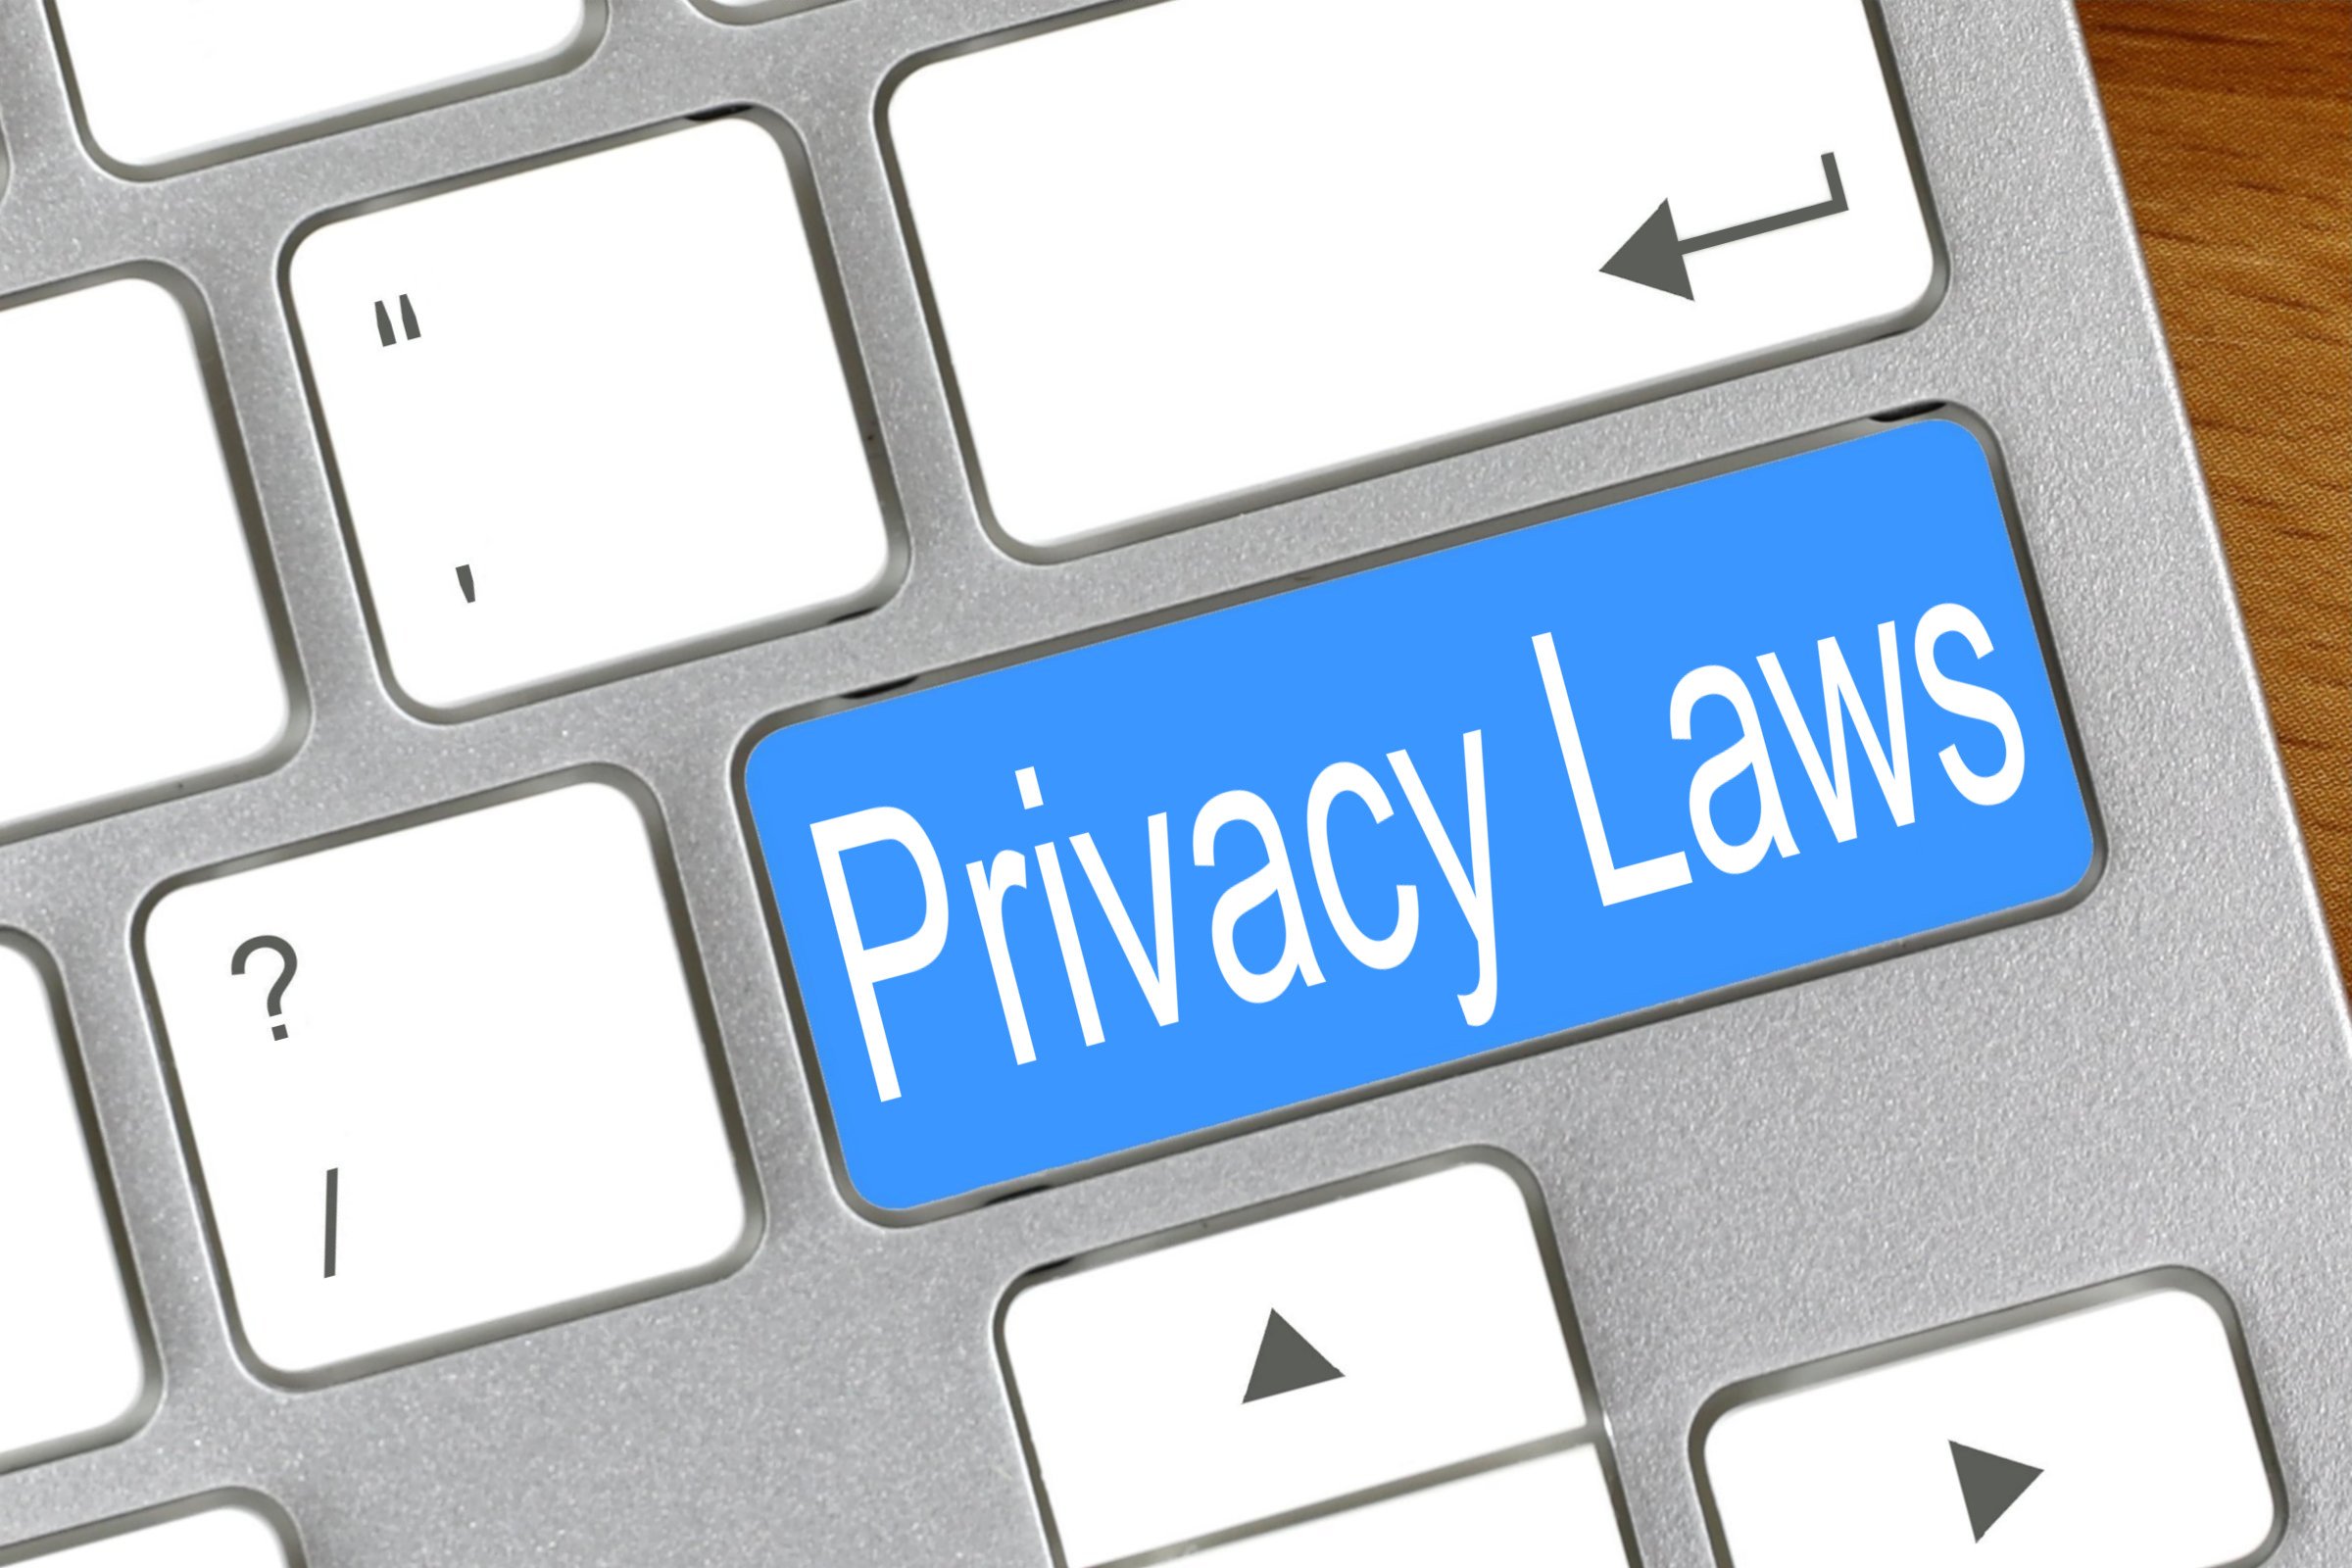 privacy laws